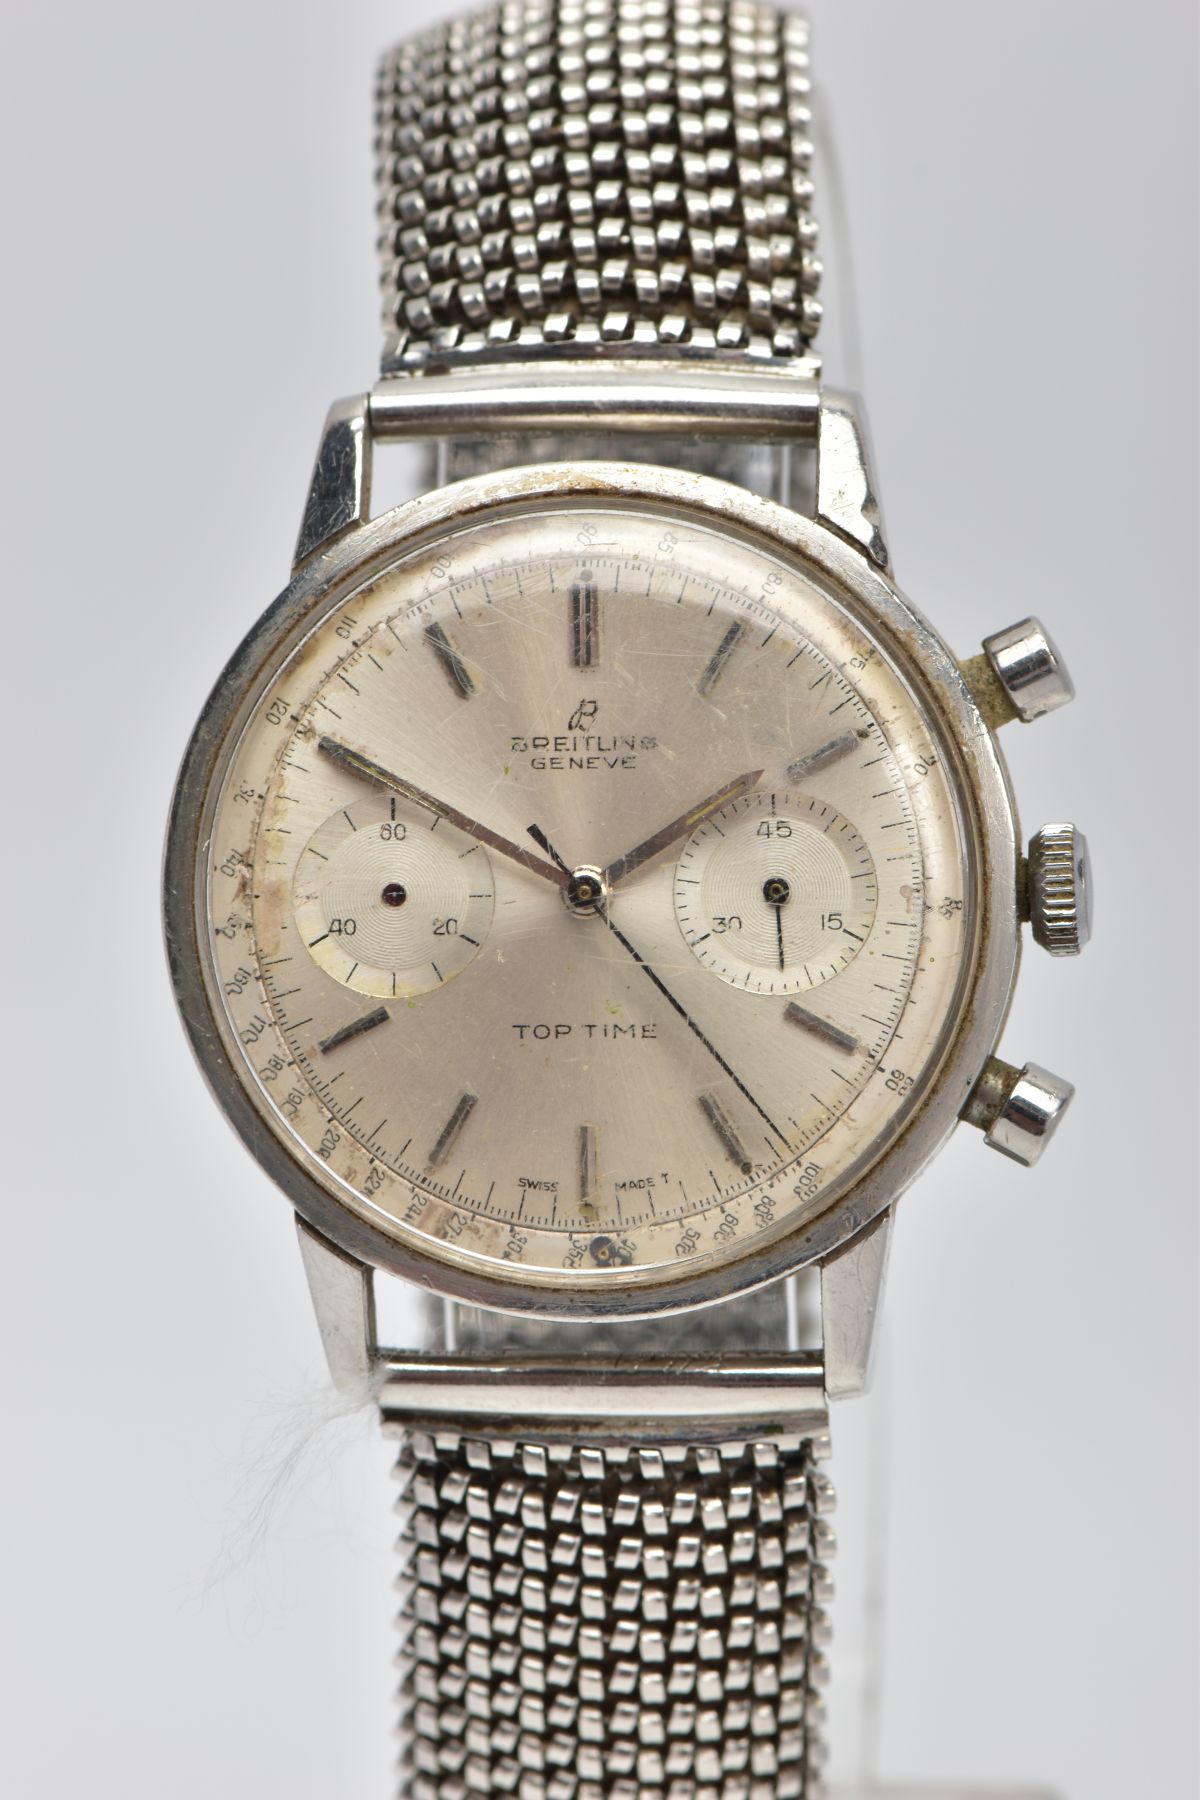 A 'BREITLING GENEVE, TOP TIME' WRISTWATCH, hand wound movement, round silver dial signed 'Breitling,